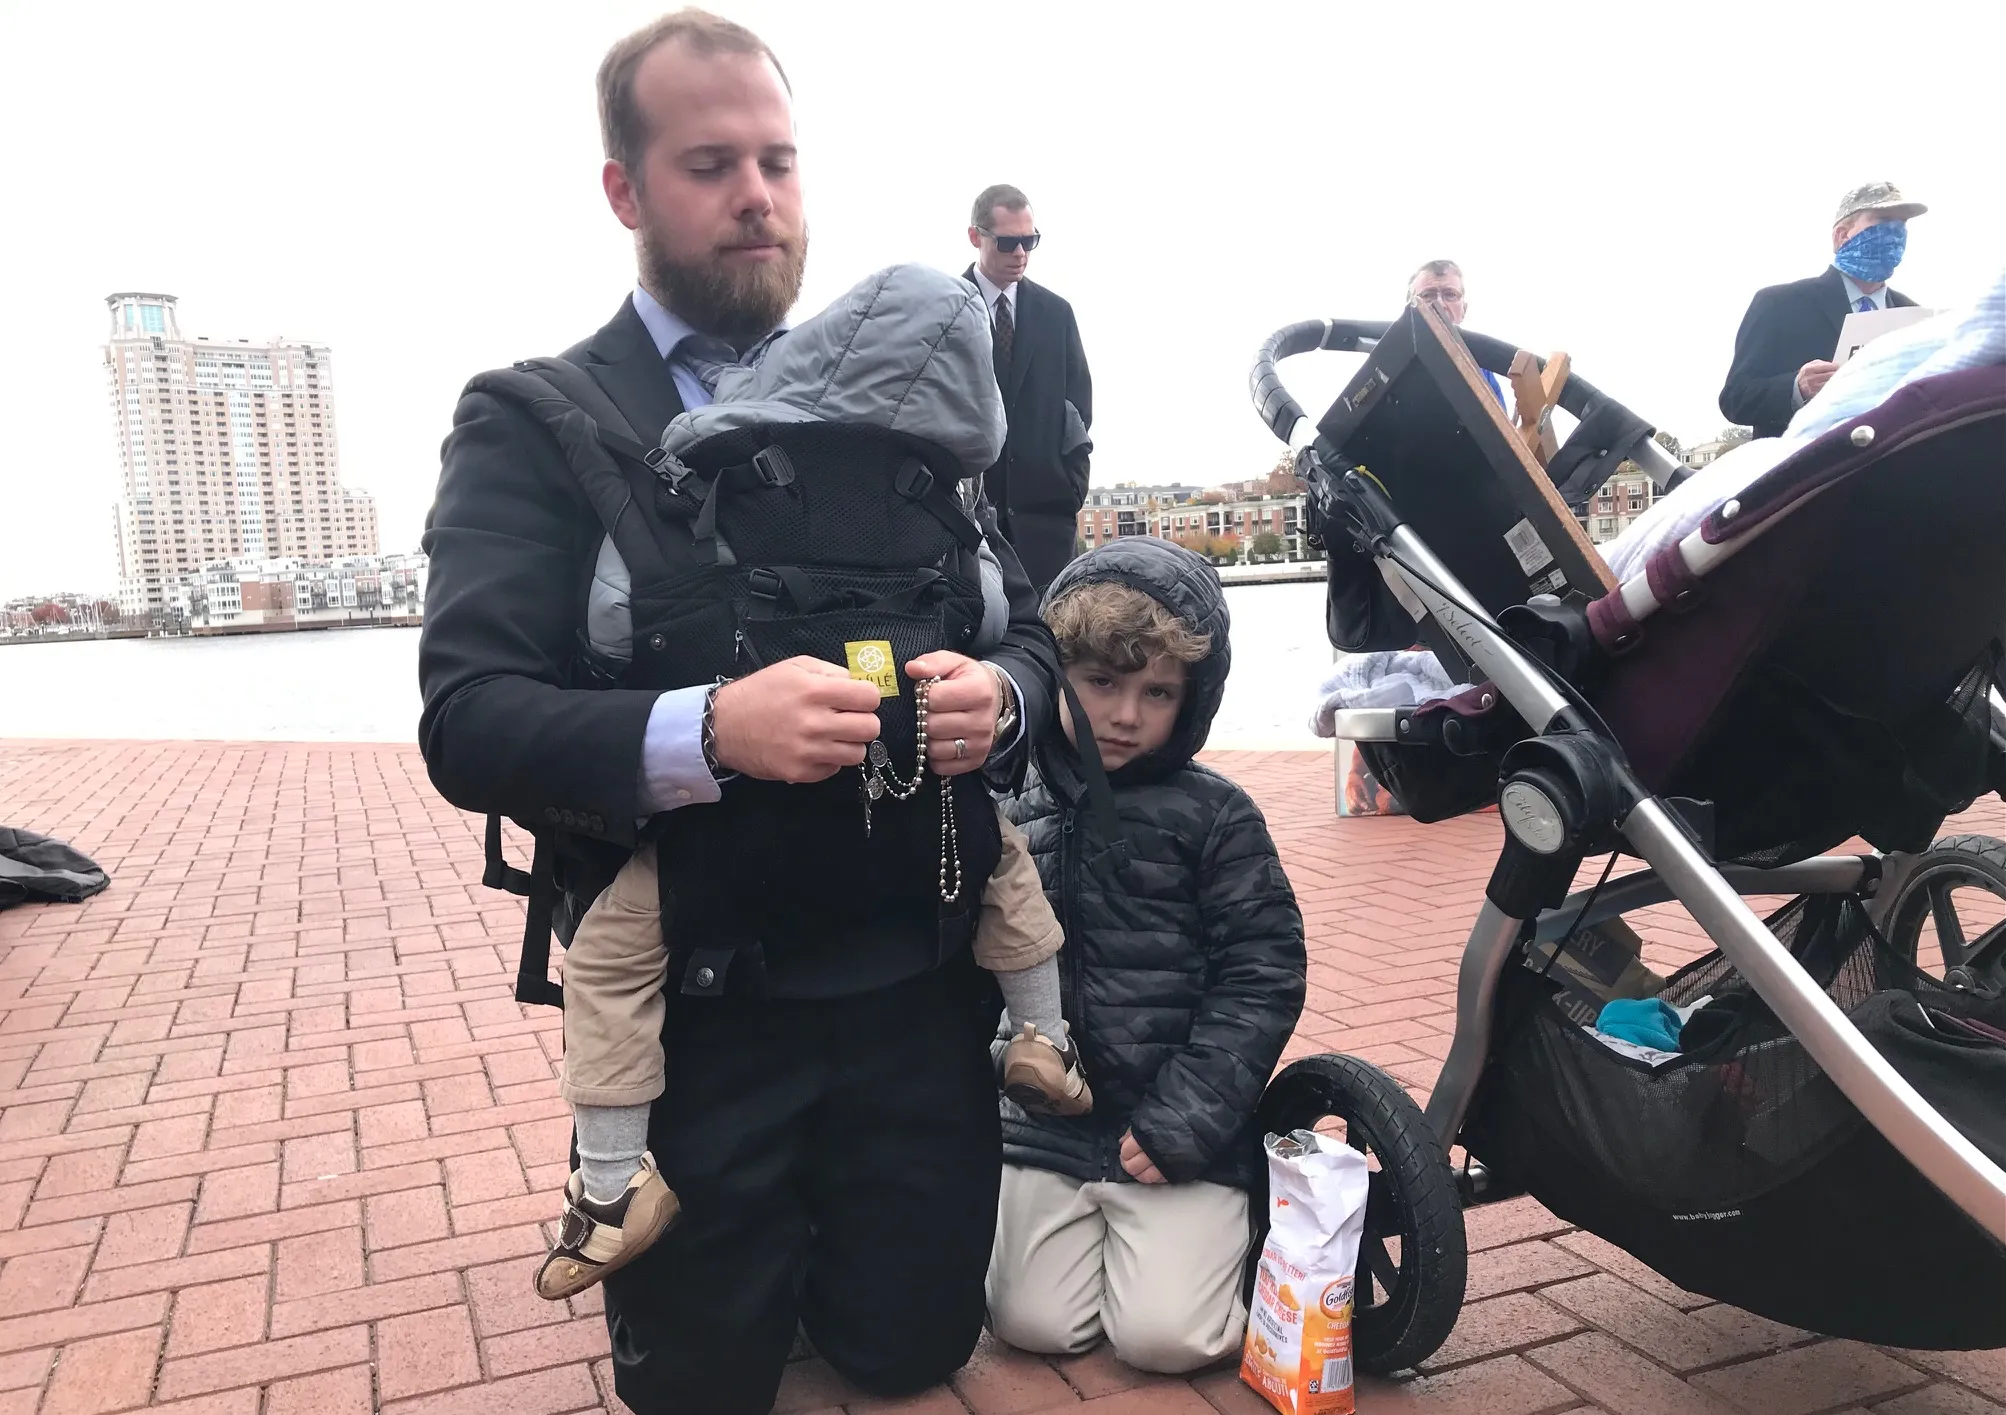 Gabriel Vance, of Columbus, Ohio, prays the rosary, with his three young sons beside him, at the pro-life Men's March in Baltimore on Nov. 15, 2021.?w=200&h=150